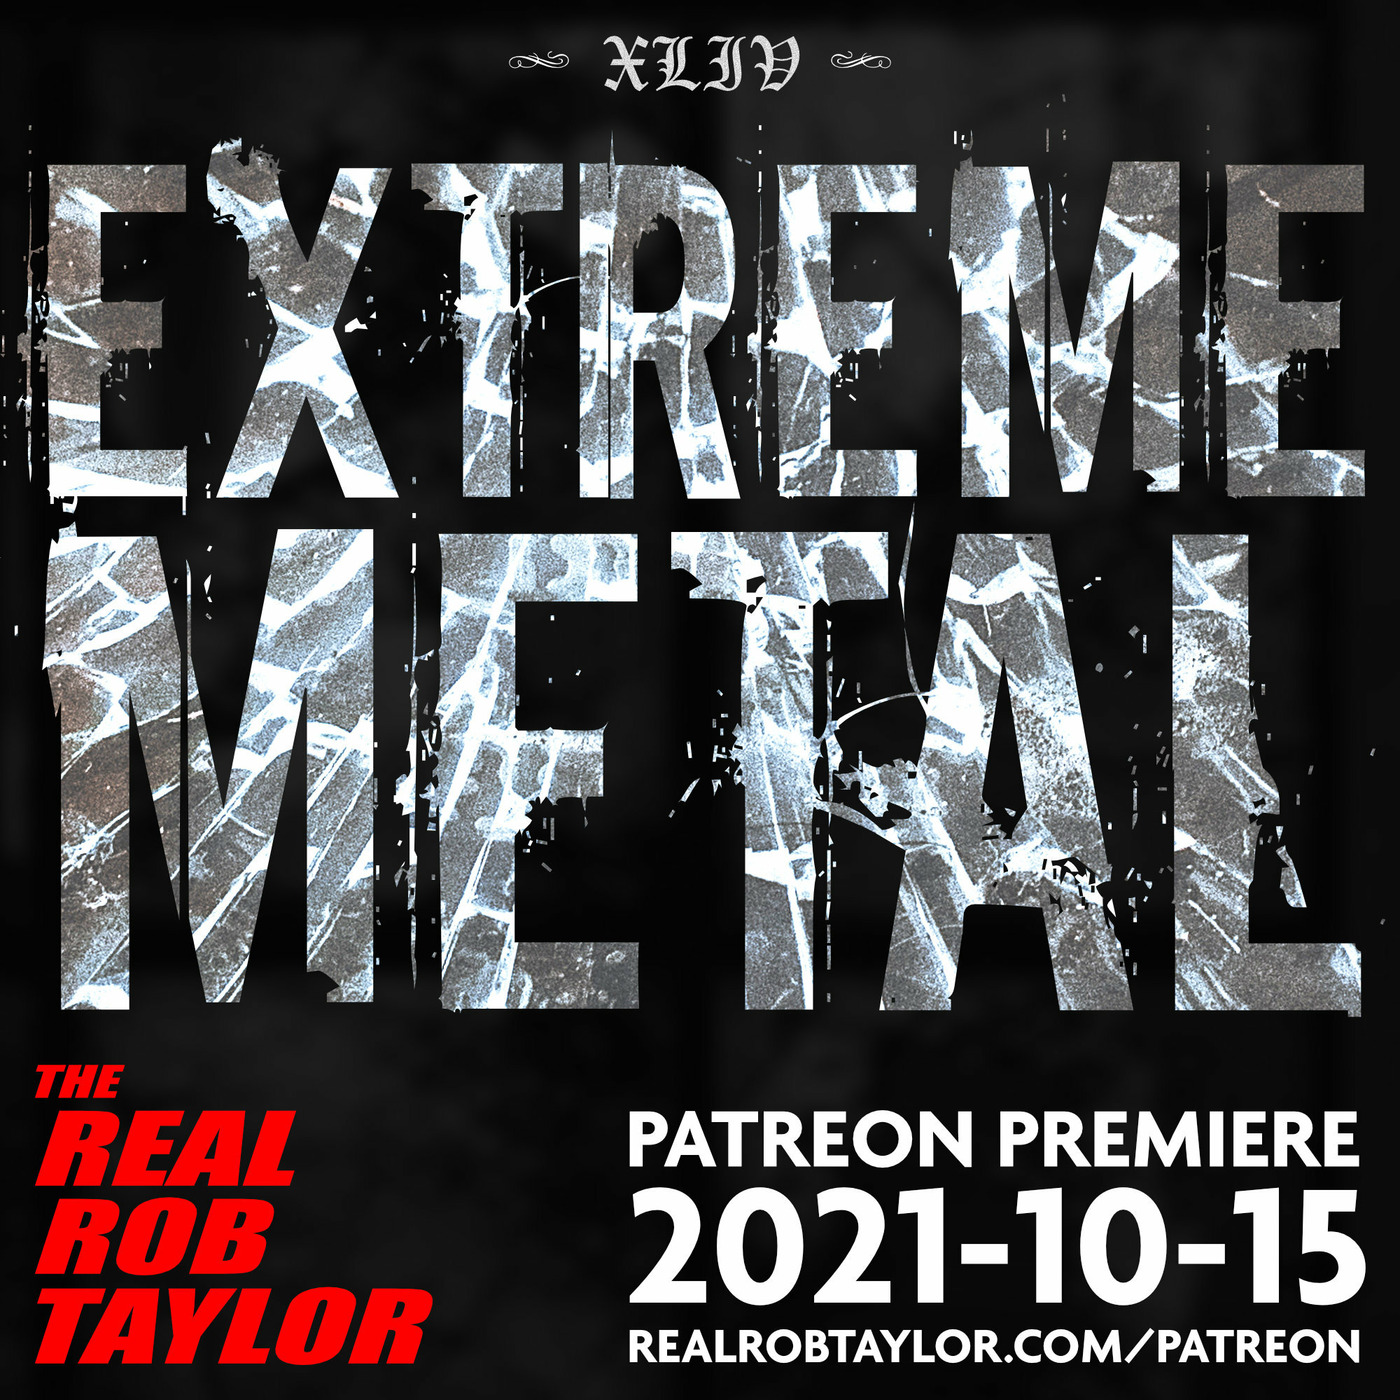 The EXTREME EDITION with the REAL ROB TAYLOR